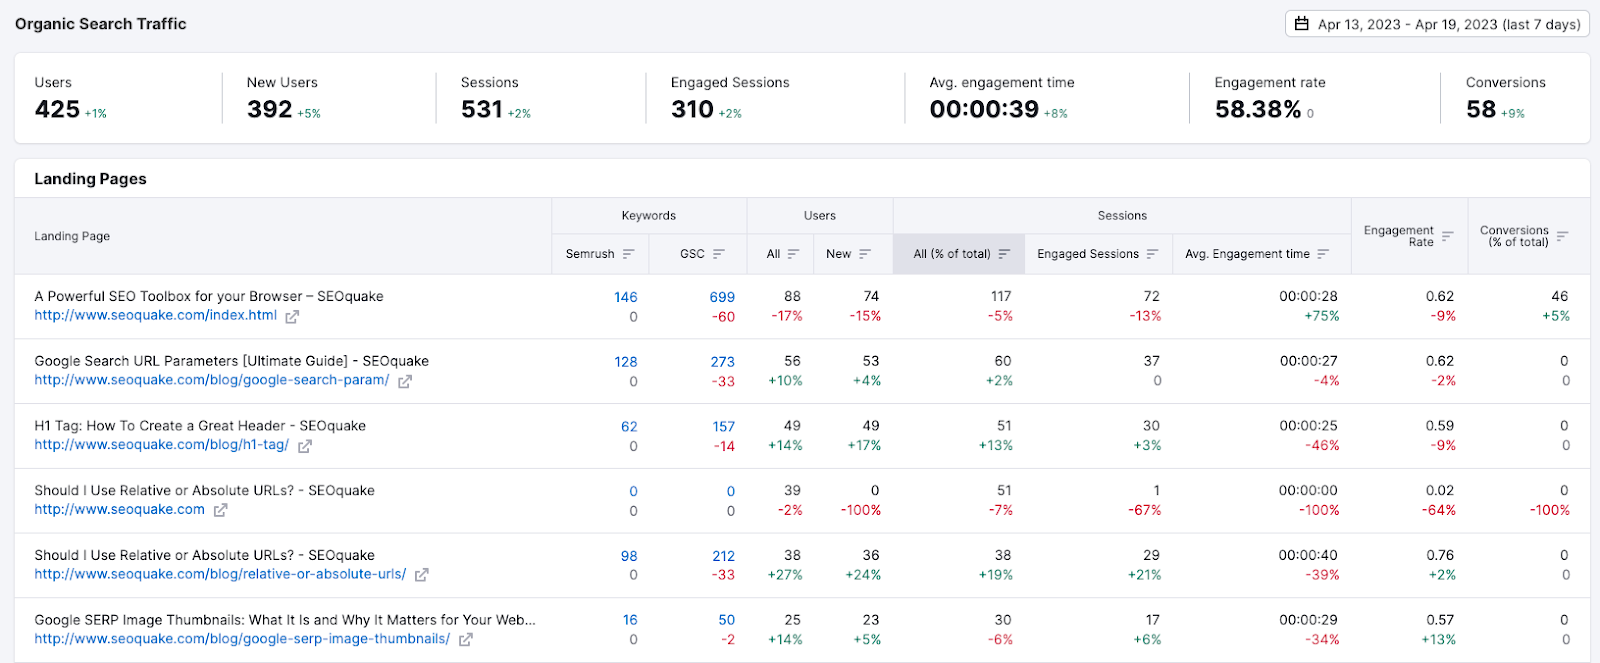 Organic Traffic Insights report showing the main metrics, landing pages, keywords, and their metrics both from Semrush and GSC.